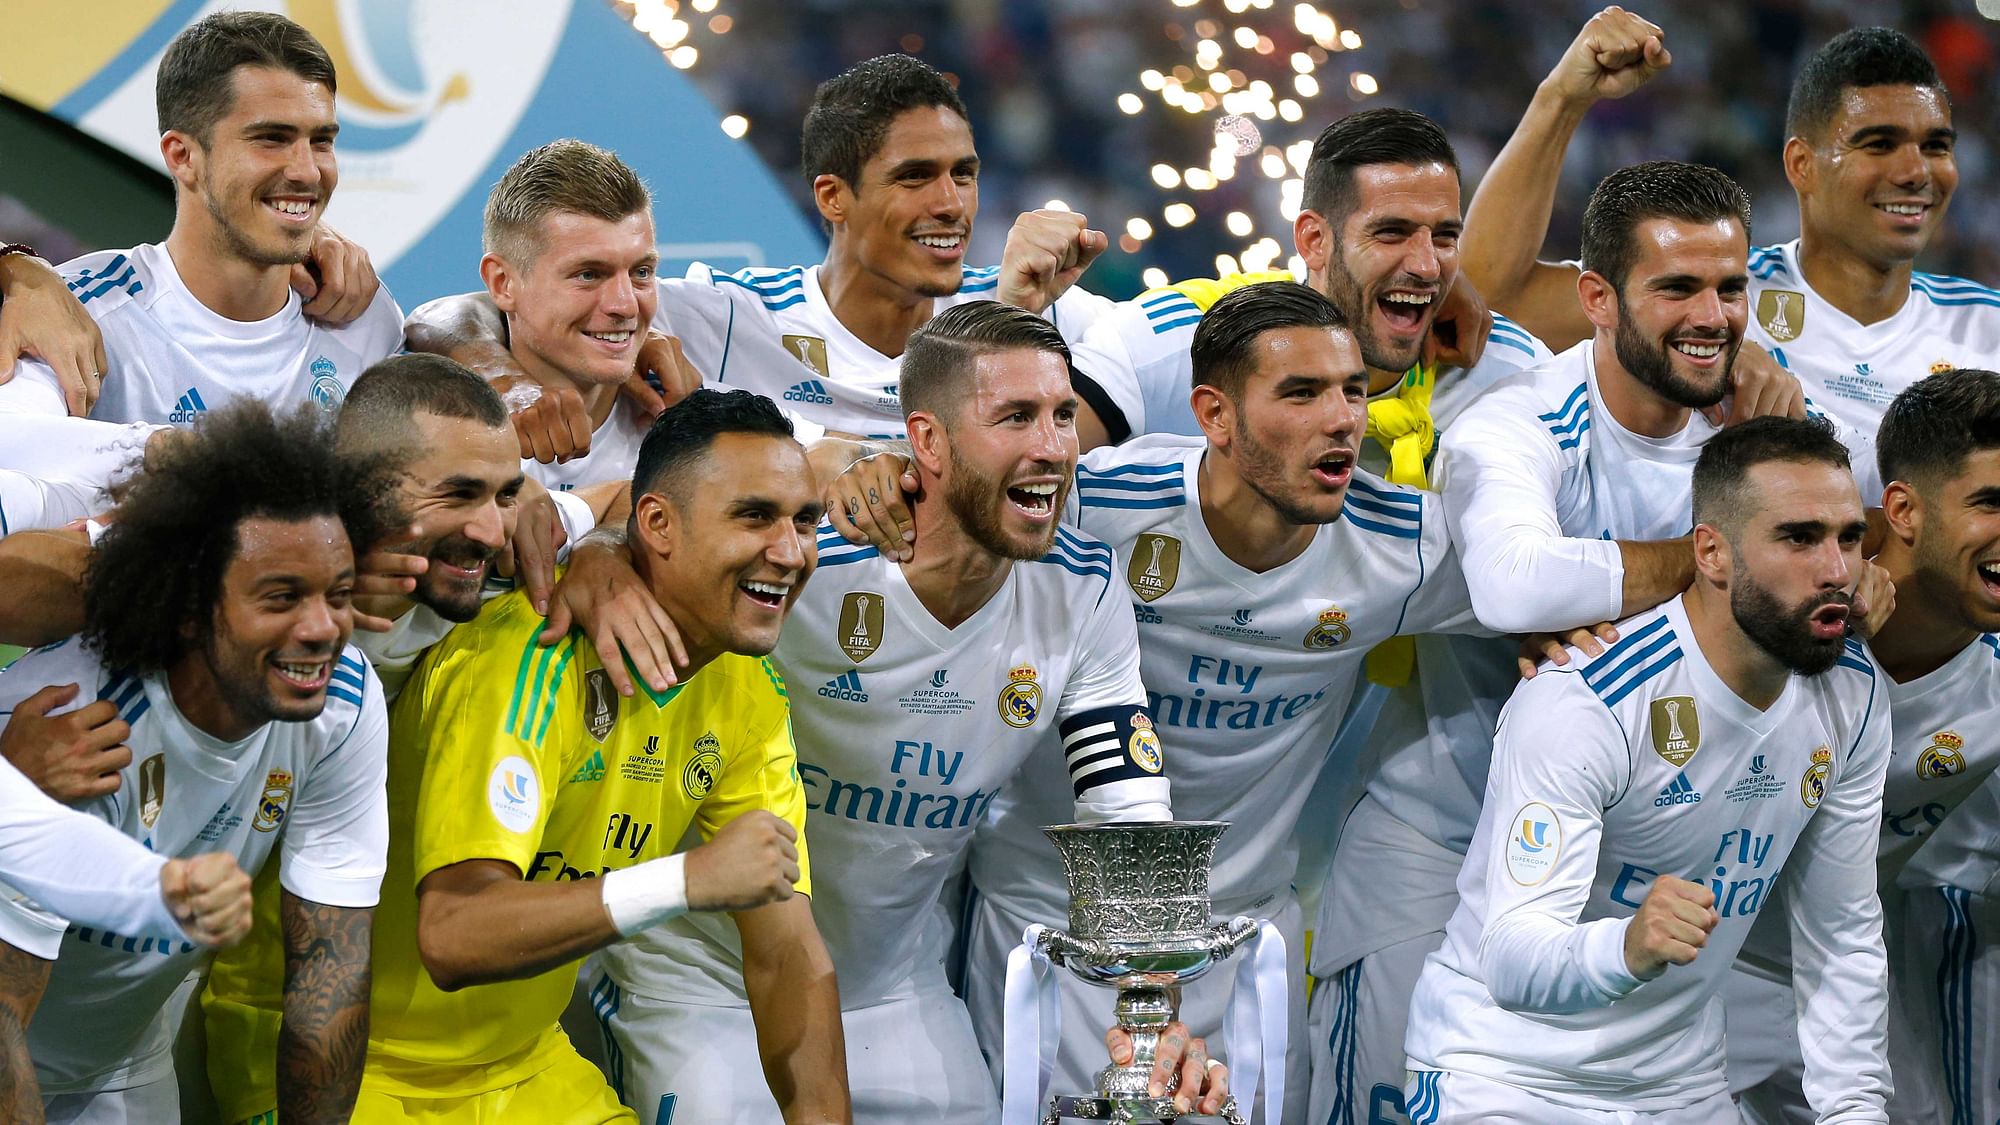 Real Madrid’s players celebrate with their trophy after winning the Spanish Super Cup against Barcelona at the Santiago Bernabeu stadium in Madrid